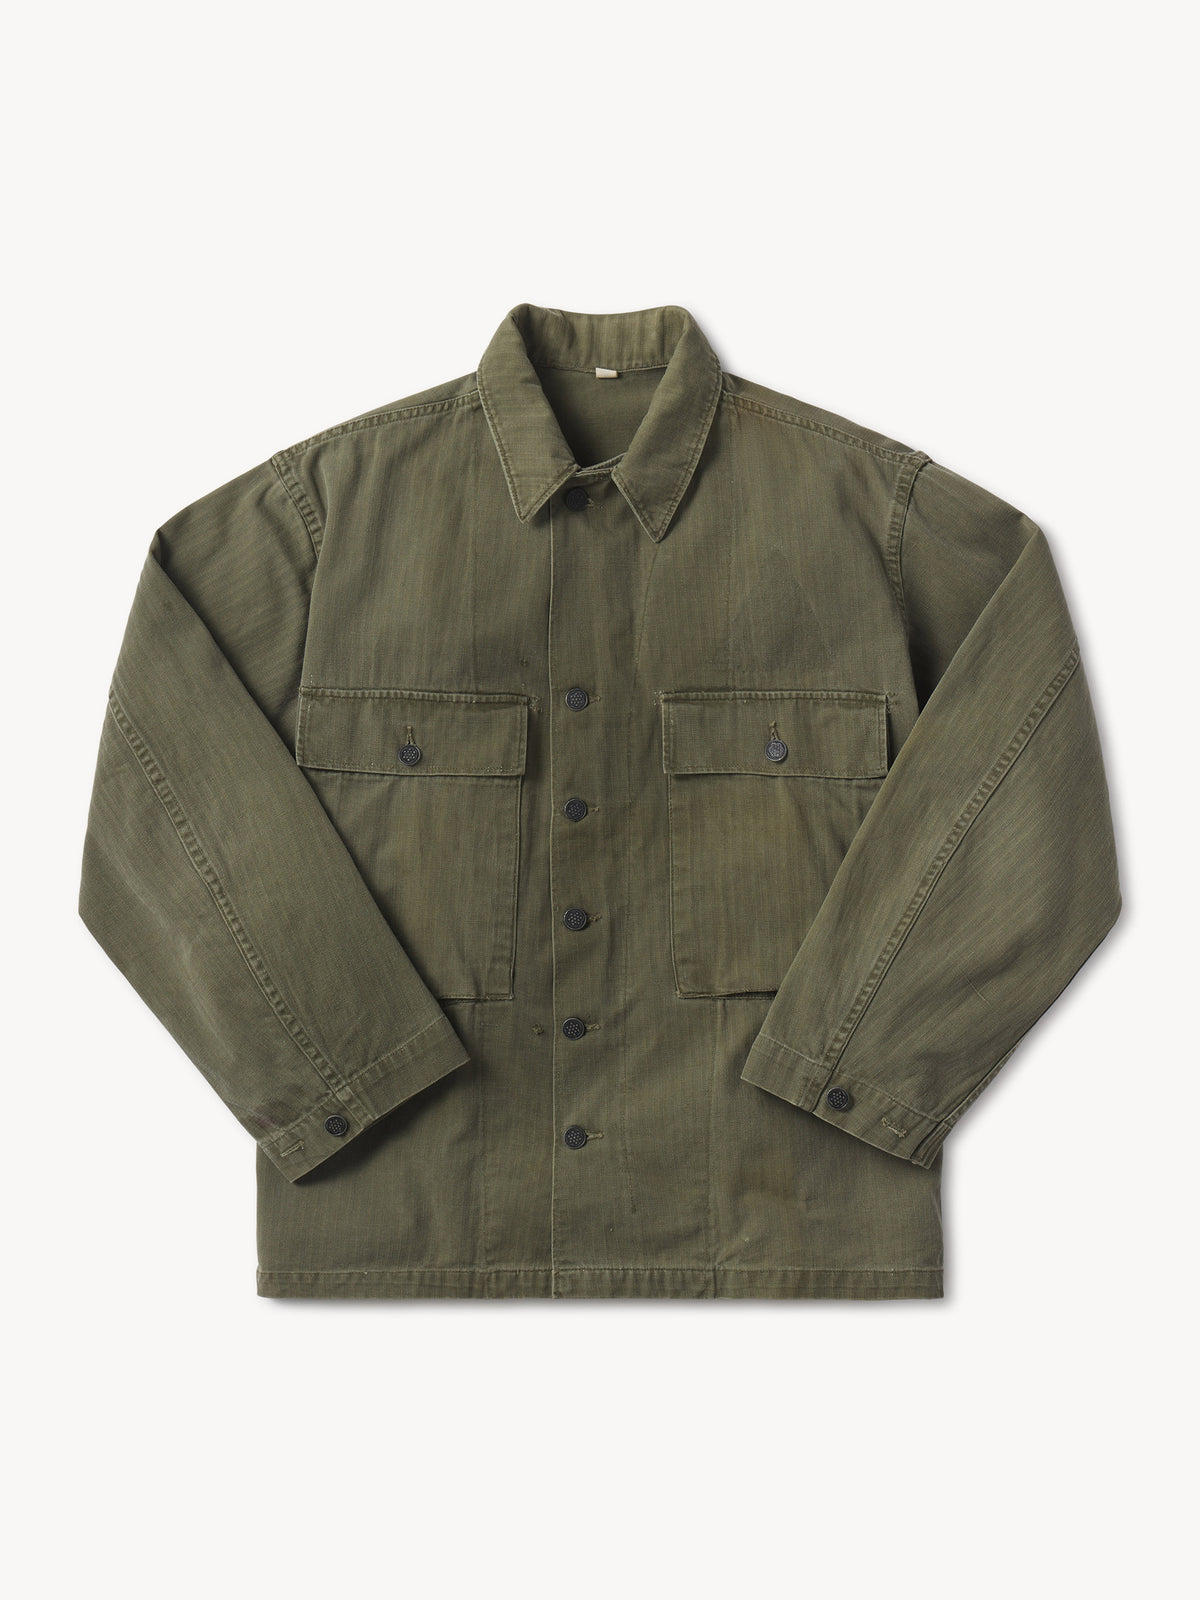 US Army Second Pattern 13-Star Utility Jacket - 0091 - Product flat